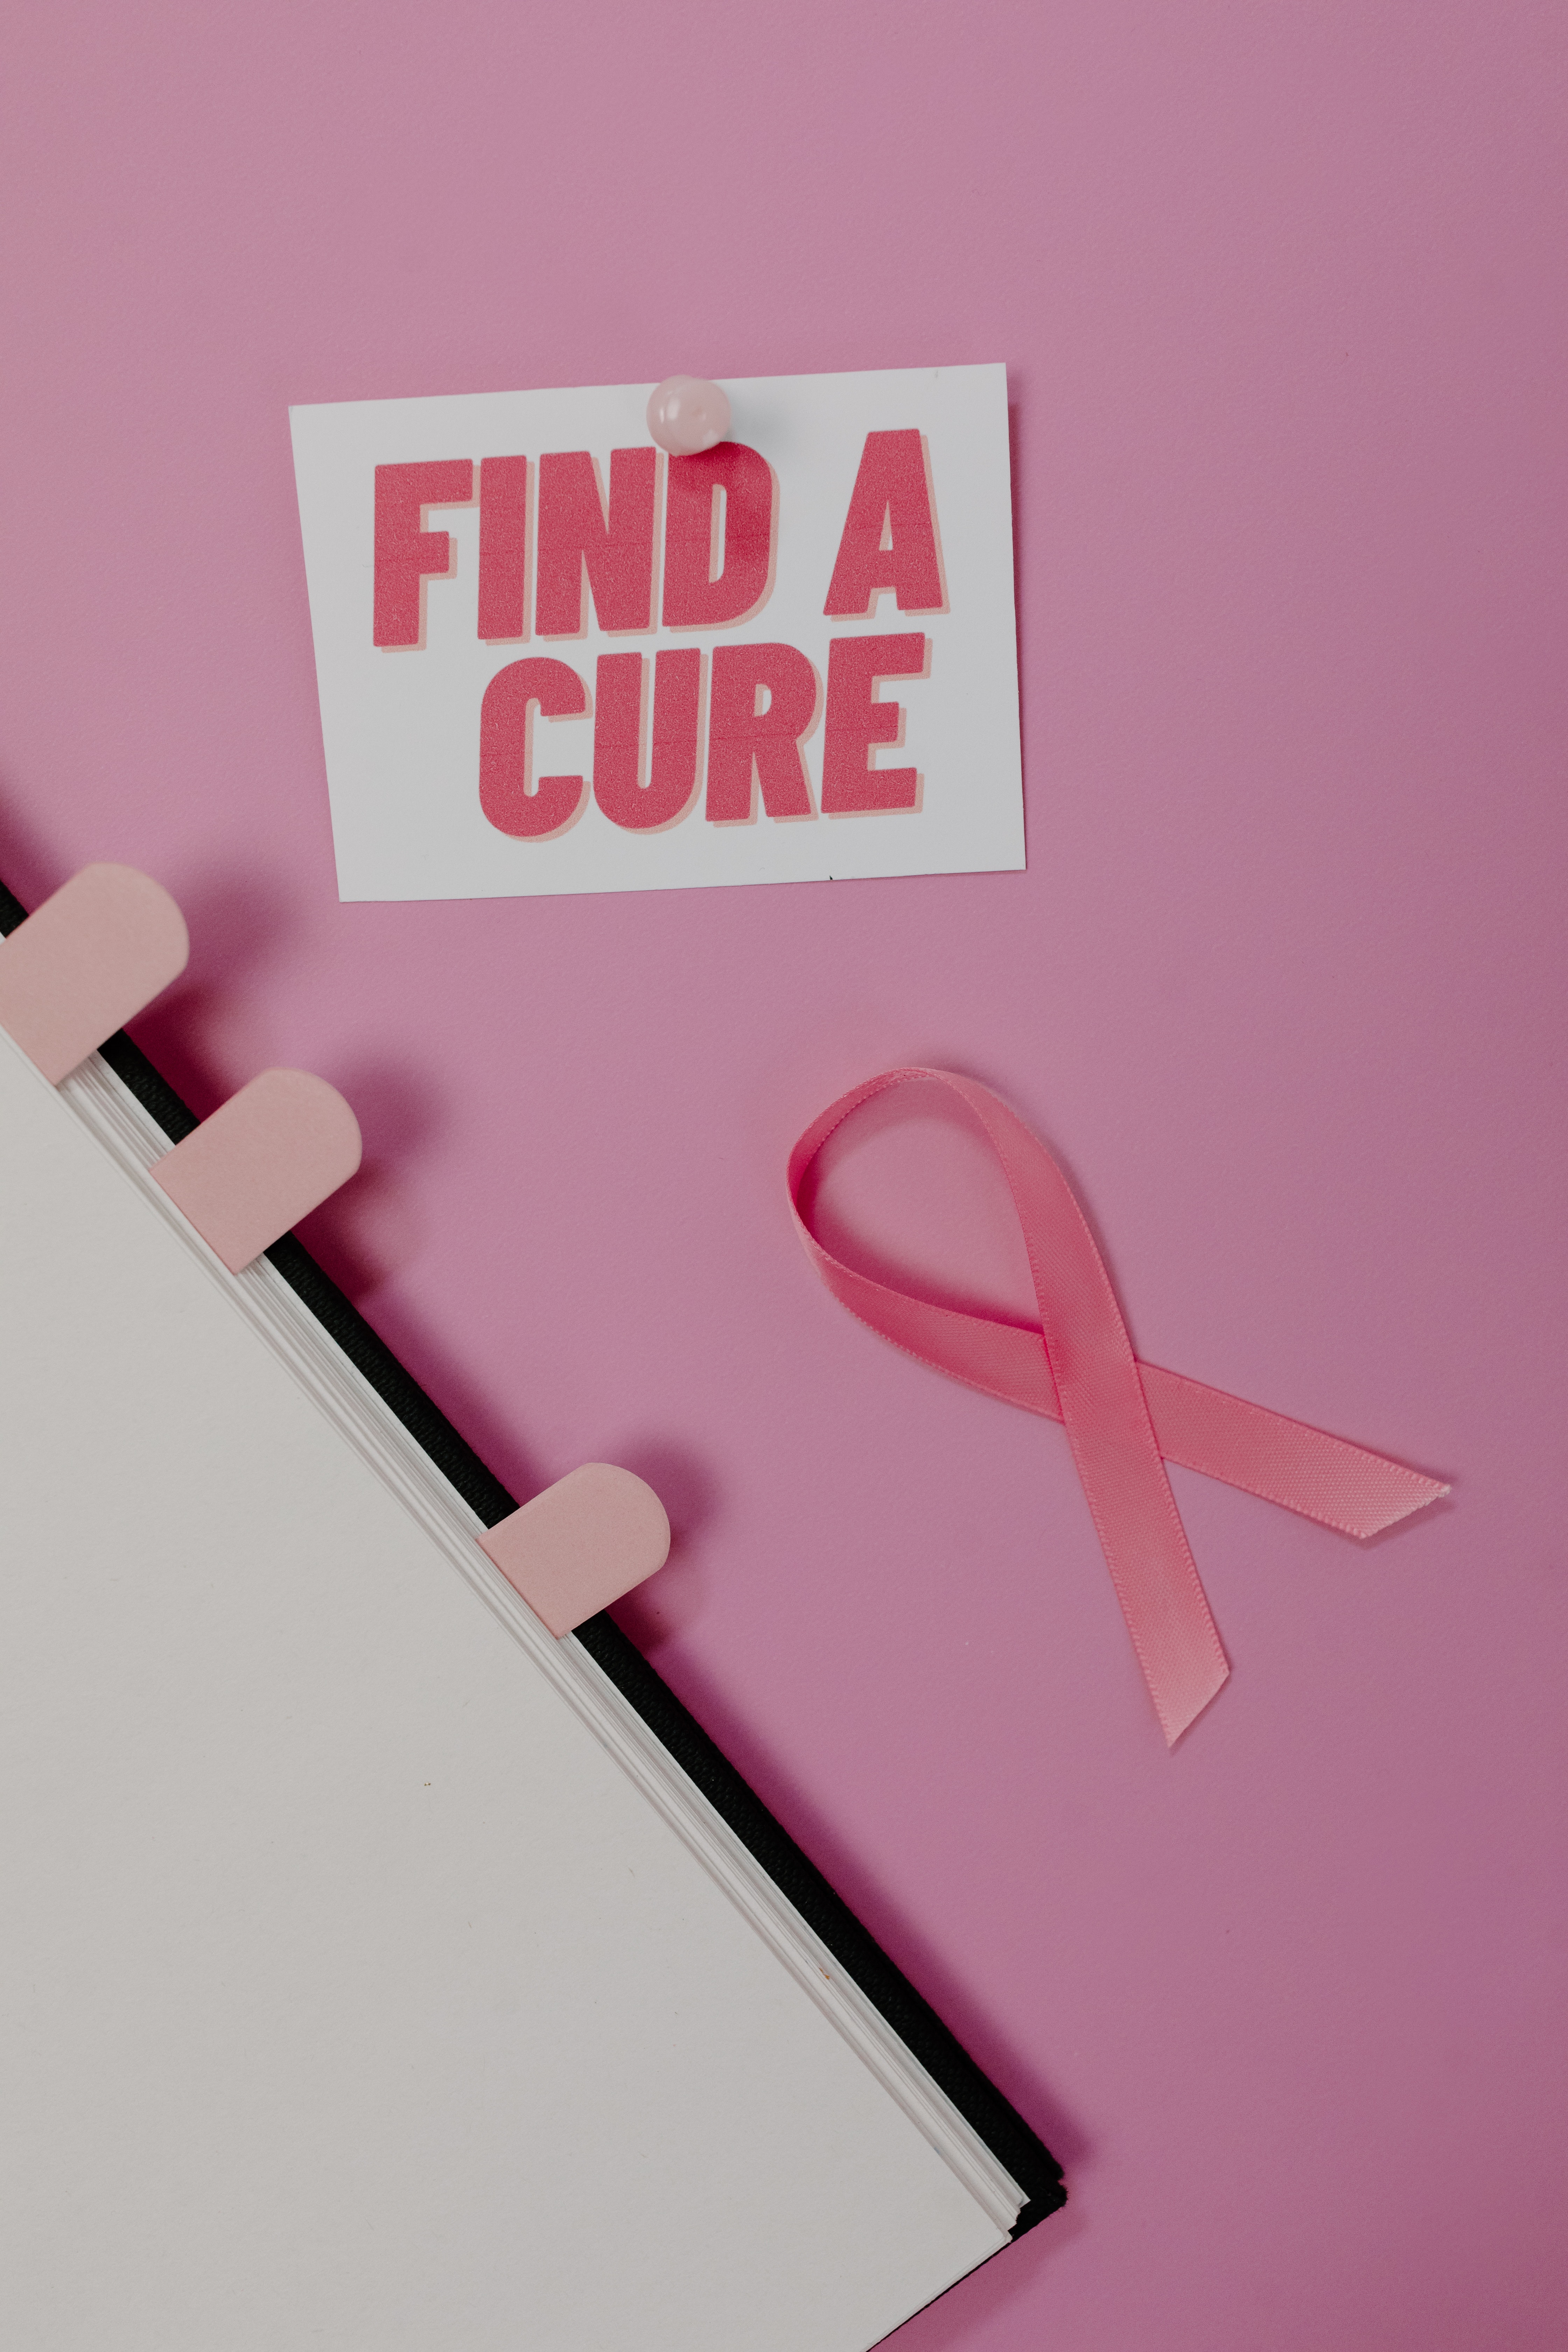 Find a cure